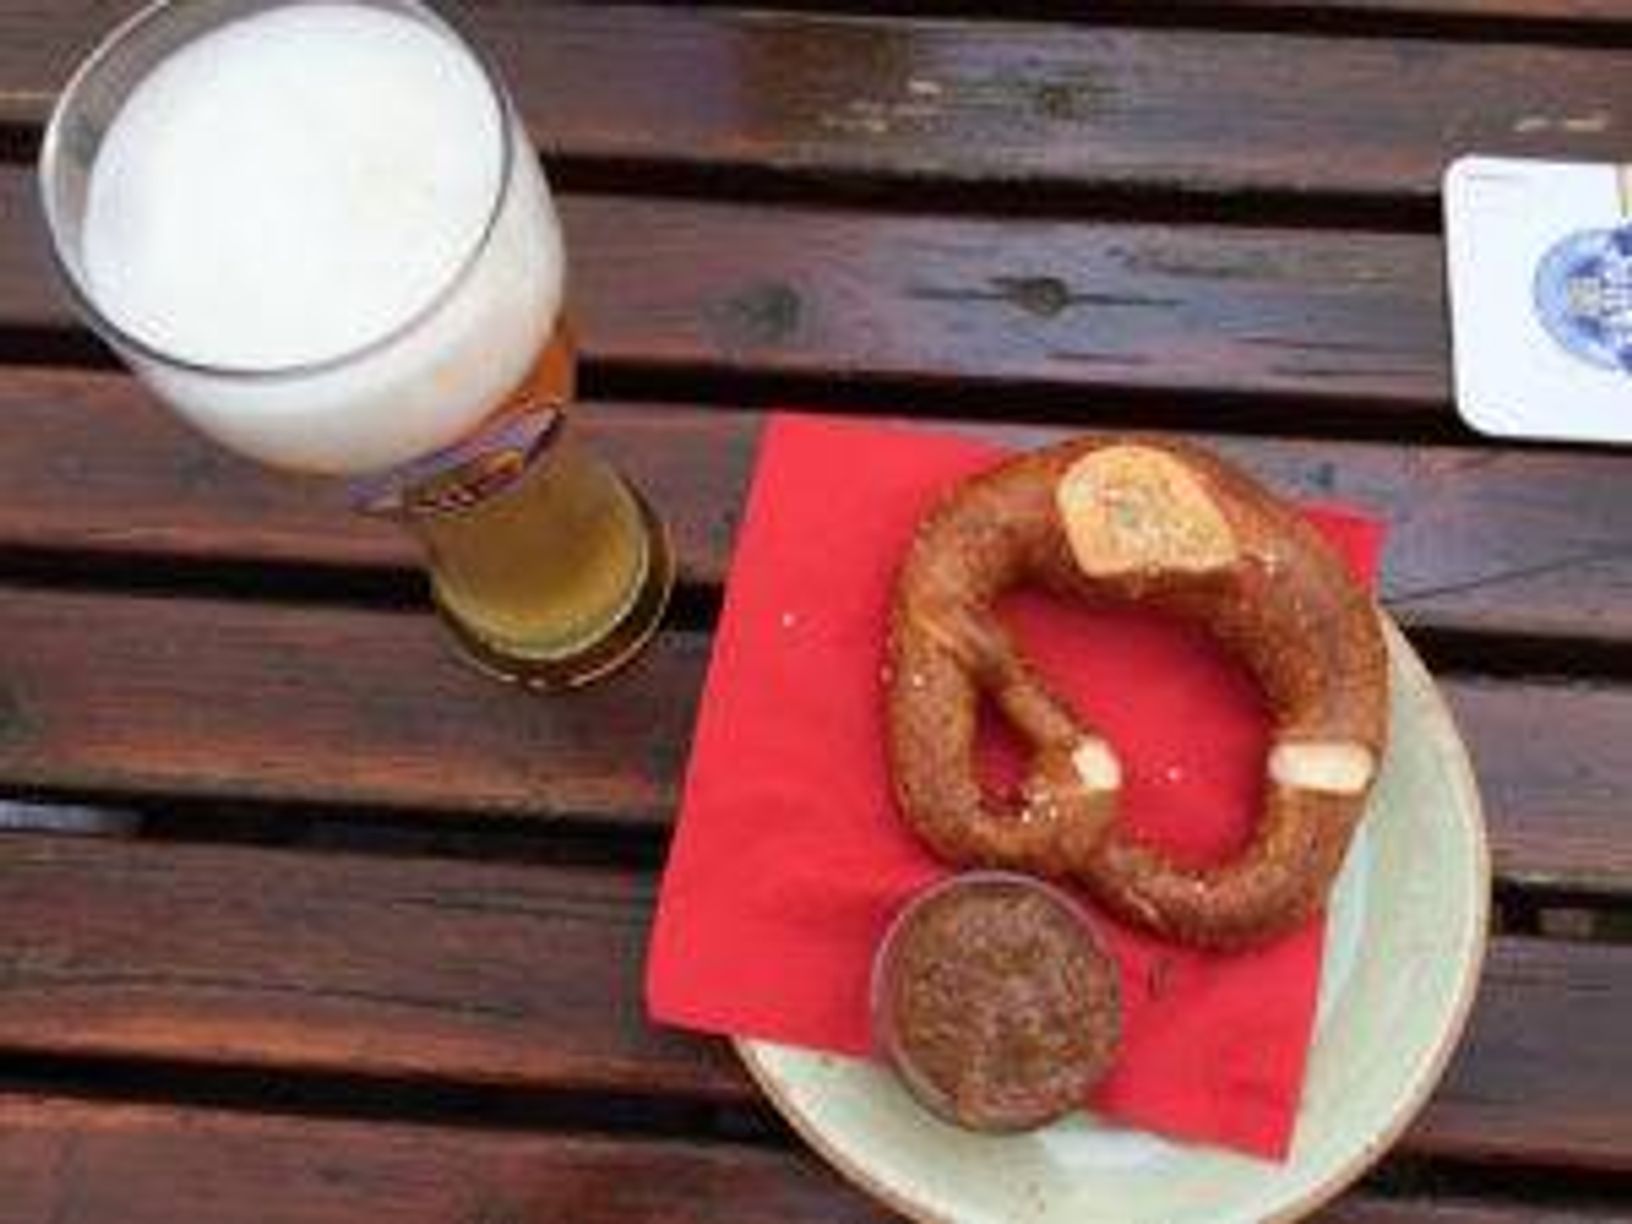 Beer and a pretzel enjoyed on a shore excursion in Miltenberg, Germany